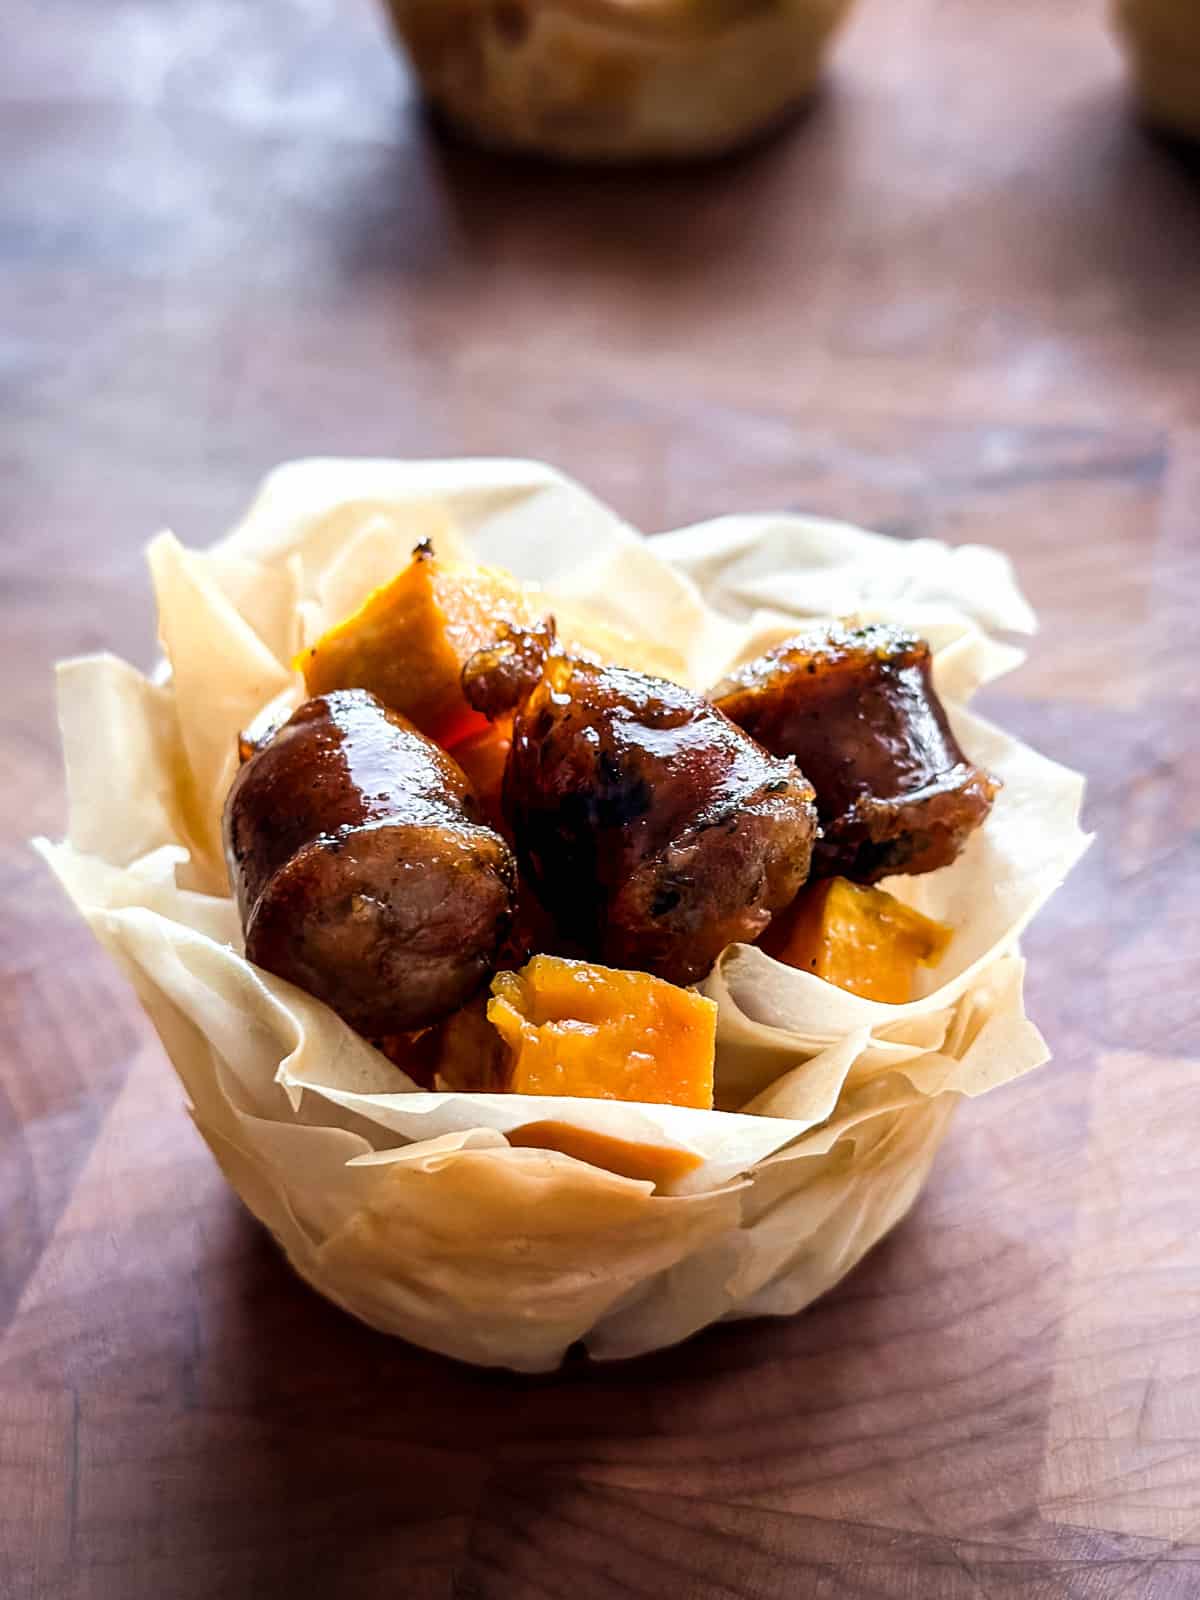 A phyllo cup appetizer with sweet potato and sausage.